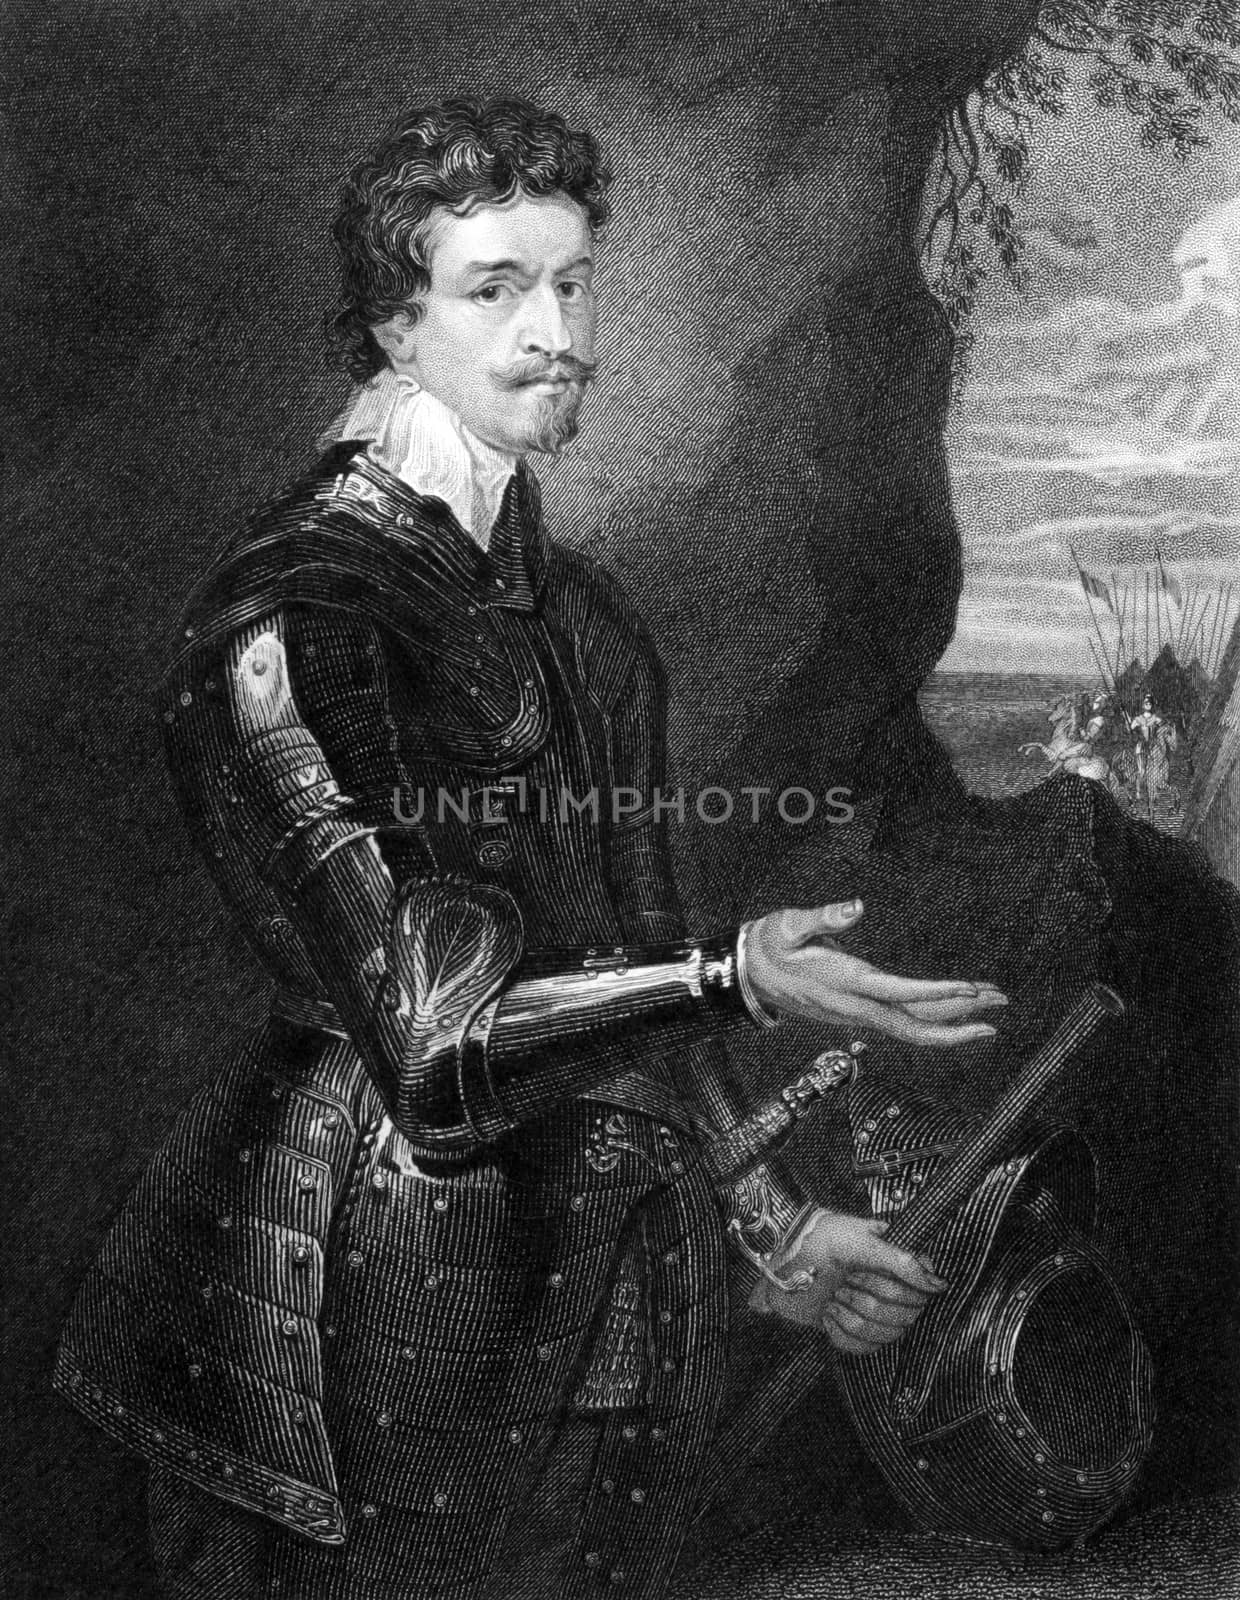 Thomas Wentworth, 1st Earl of Strafford (1593-1641) on engraving from 1829. English statesman and a major figure in the period leading up to the English Civil War. Engraved by H.Robinson and published in ''Portraits of Illustrious Personages of Great Britain'',UK,1829.